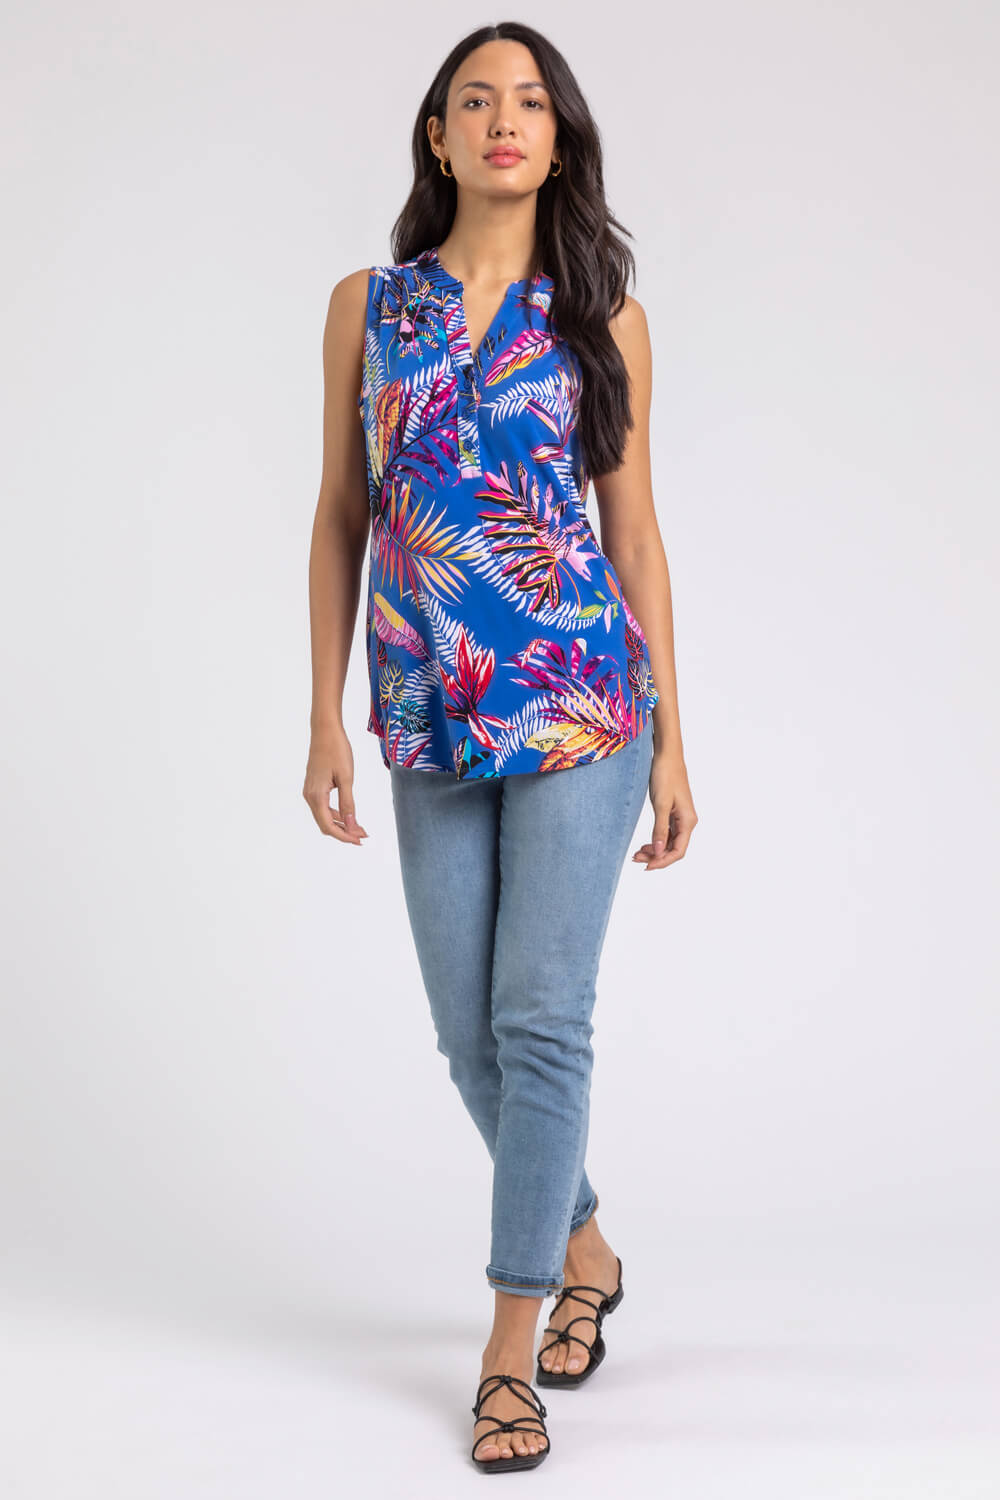 Royal Blue Tropical Print Stretch Jersey Top, Image 4 of 5